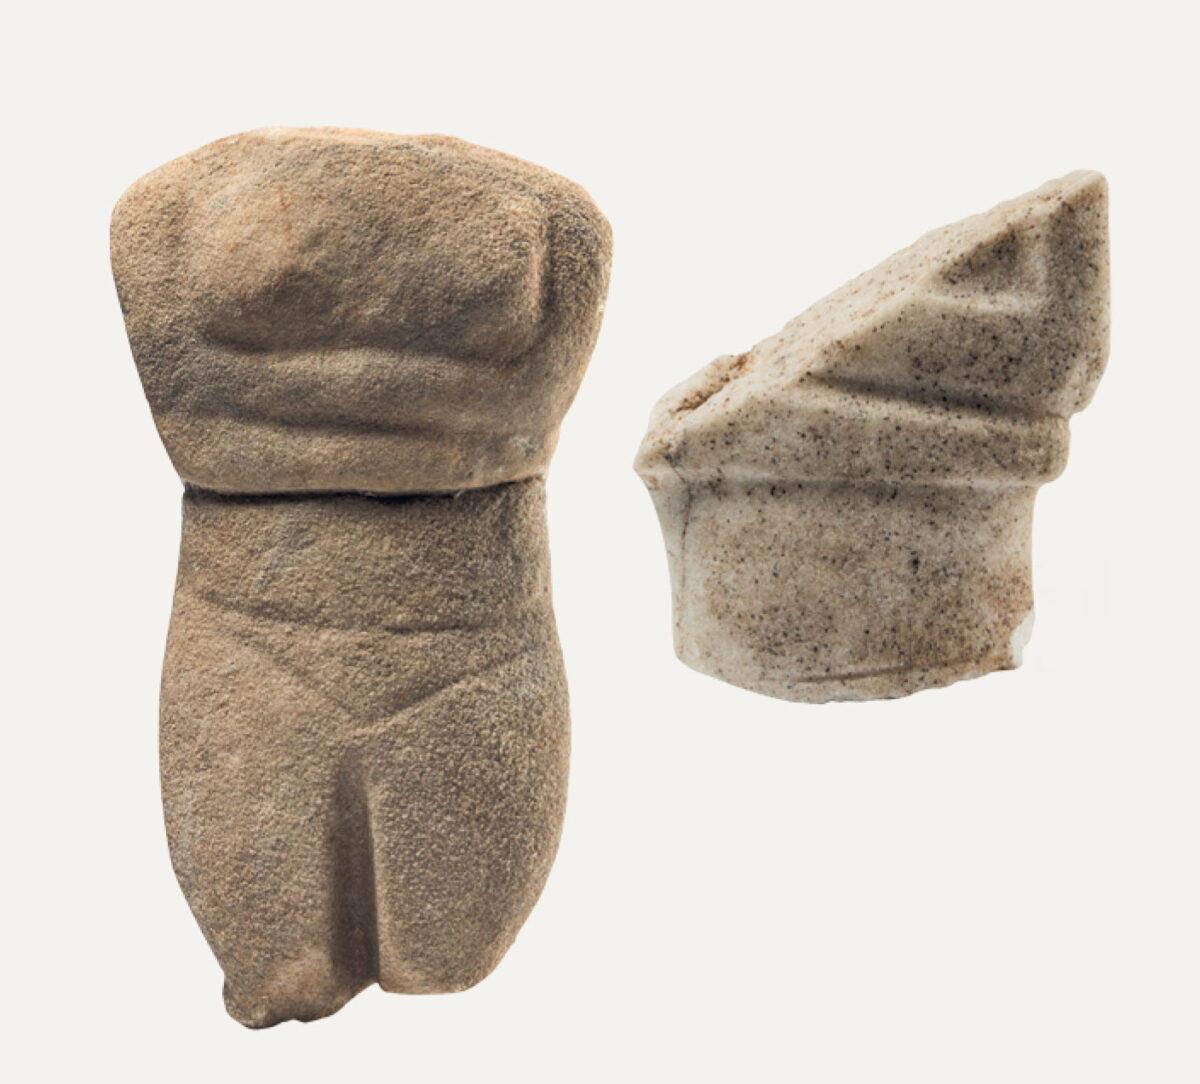 Fragment of a figurine of the Spedos variety, 2800-2300 BC. Museum of Cycladic Art.